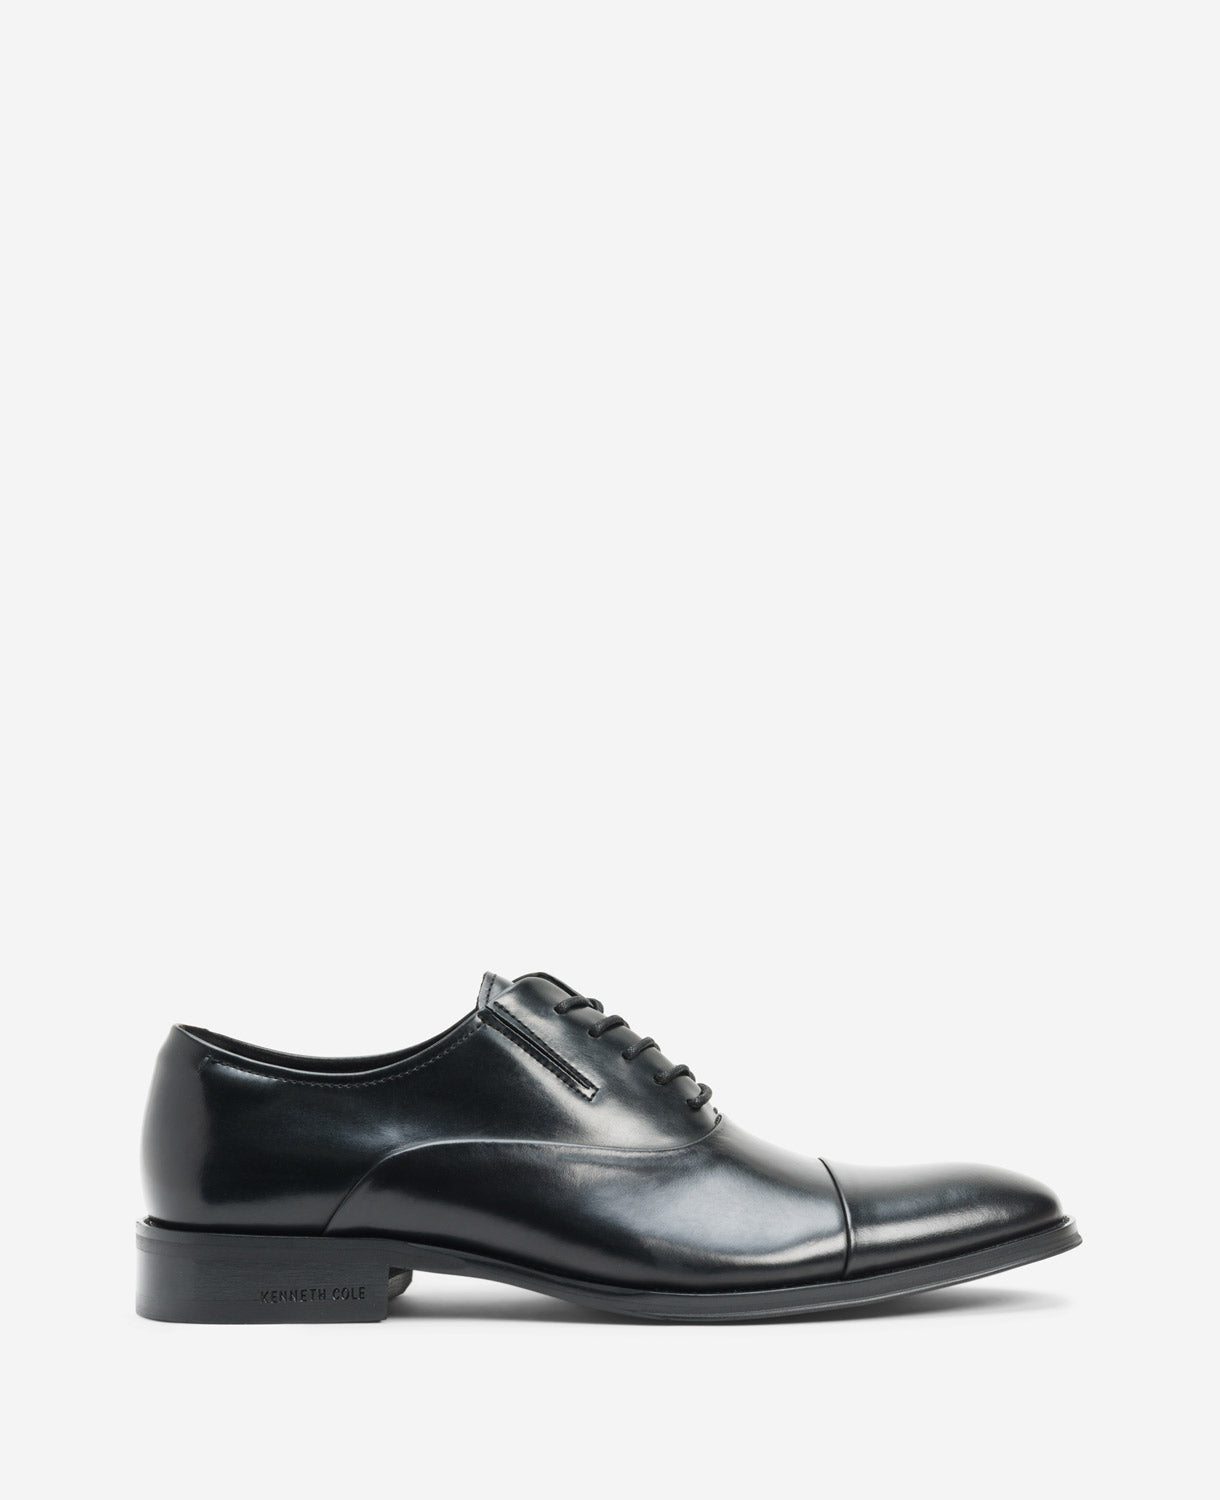 Kenneth Cole | Tully Cap Toe Oxford Shoe in Black, Size: 7.5